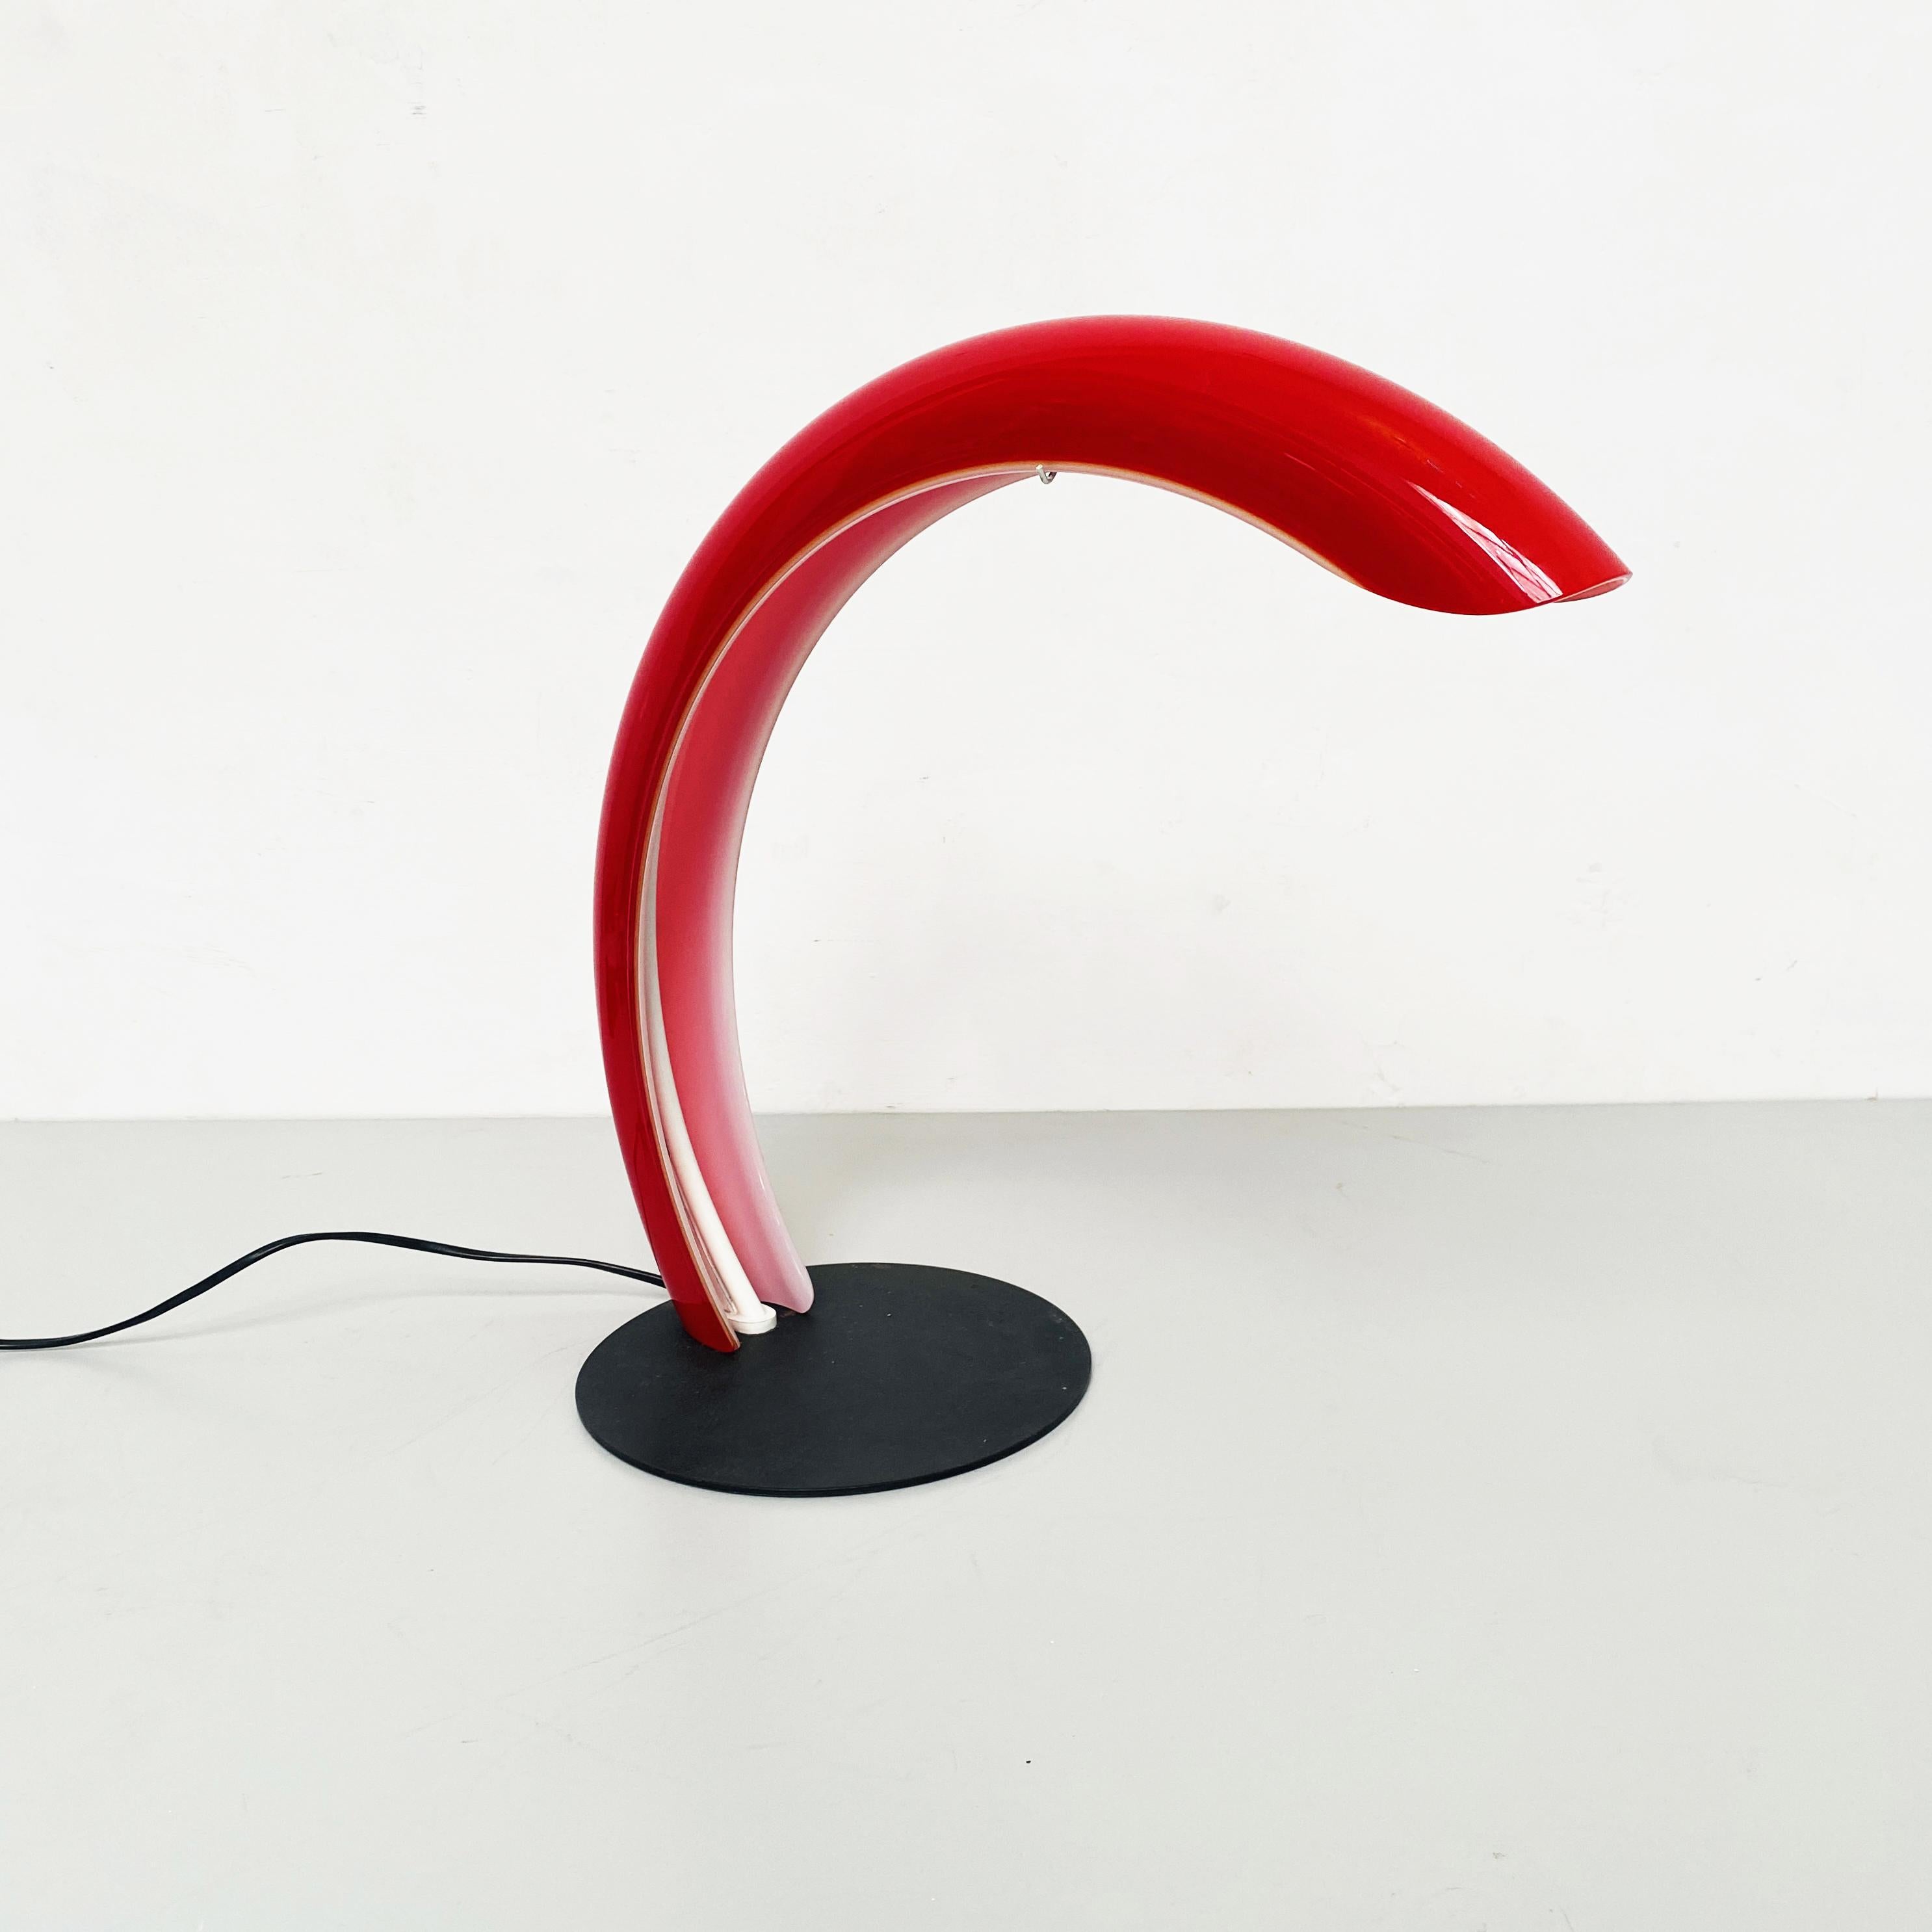 Italian mid-century red Murano glass, metal and neon table lamp by Mazzega, 1970s
Curved red Murano glass table lamp with neon and circular metal base, by Mazzega.
1970s
Very good condition.
Measurements in cm 45x 21 x 42 H.